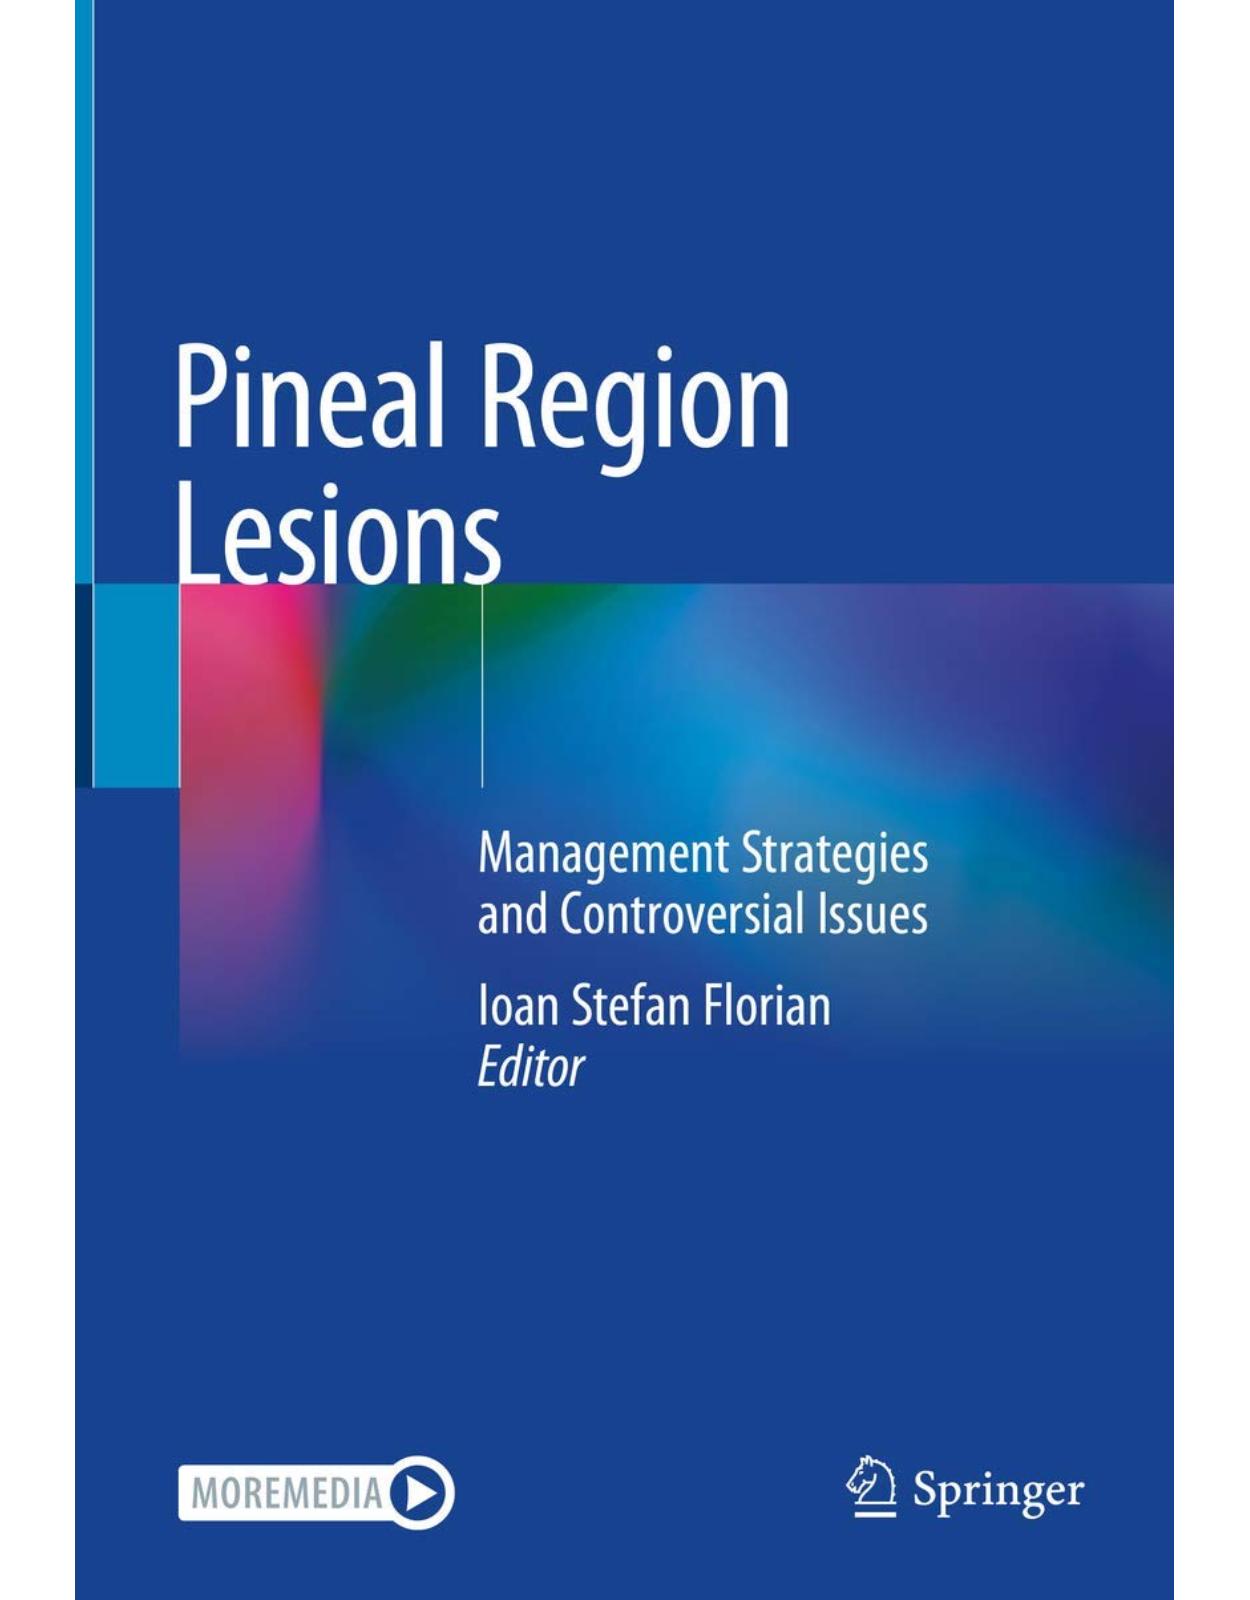 Pineal Region Lesions: Management Strategies and Controversial Issues